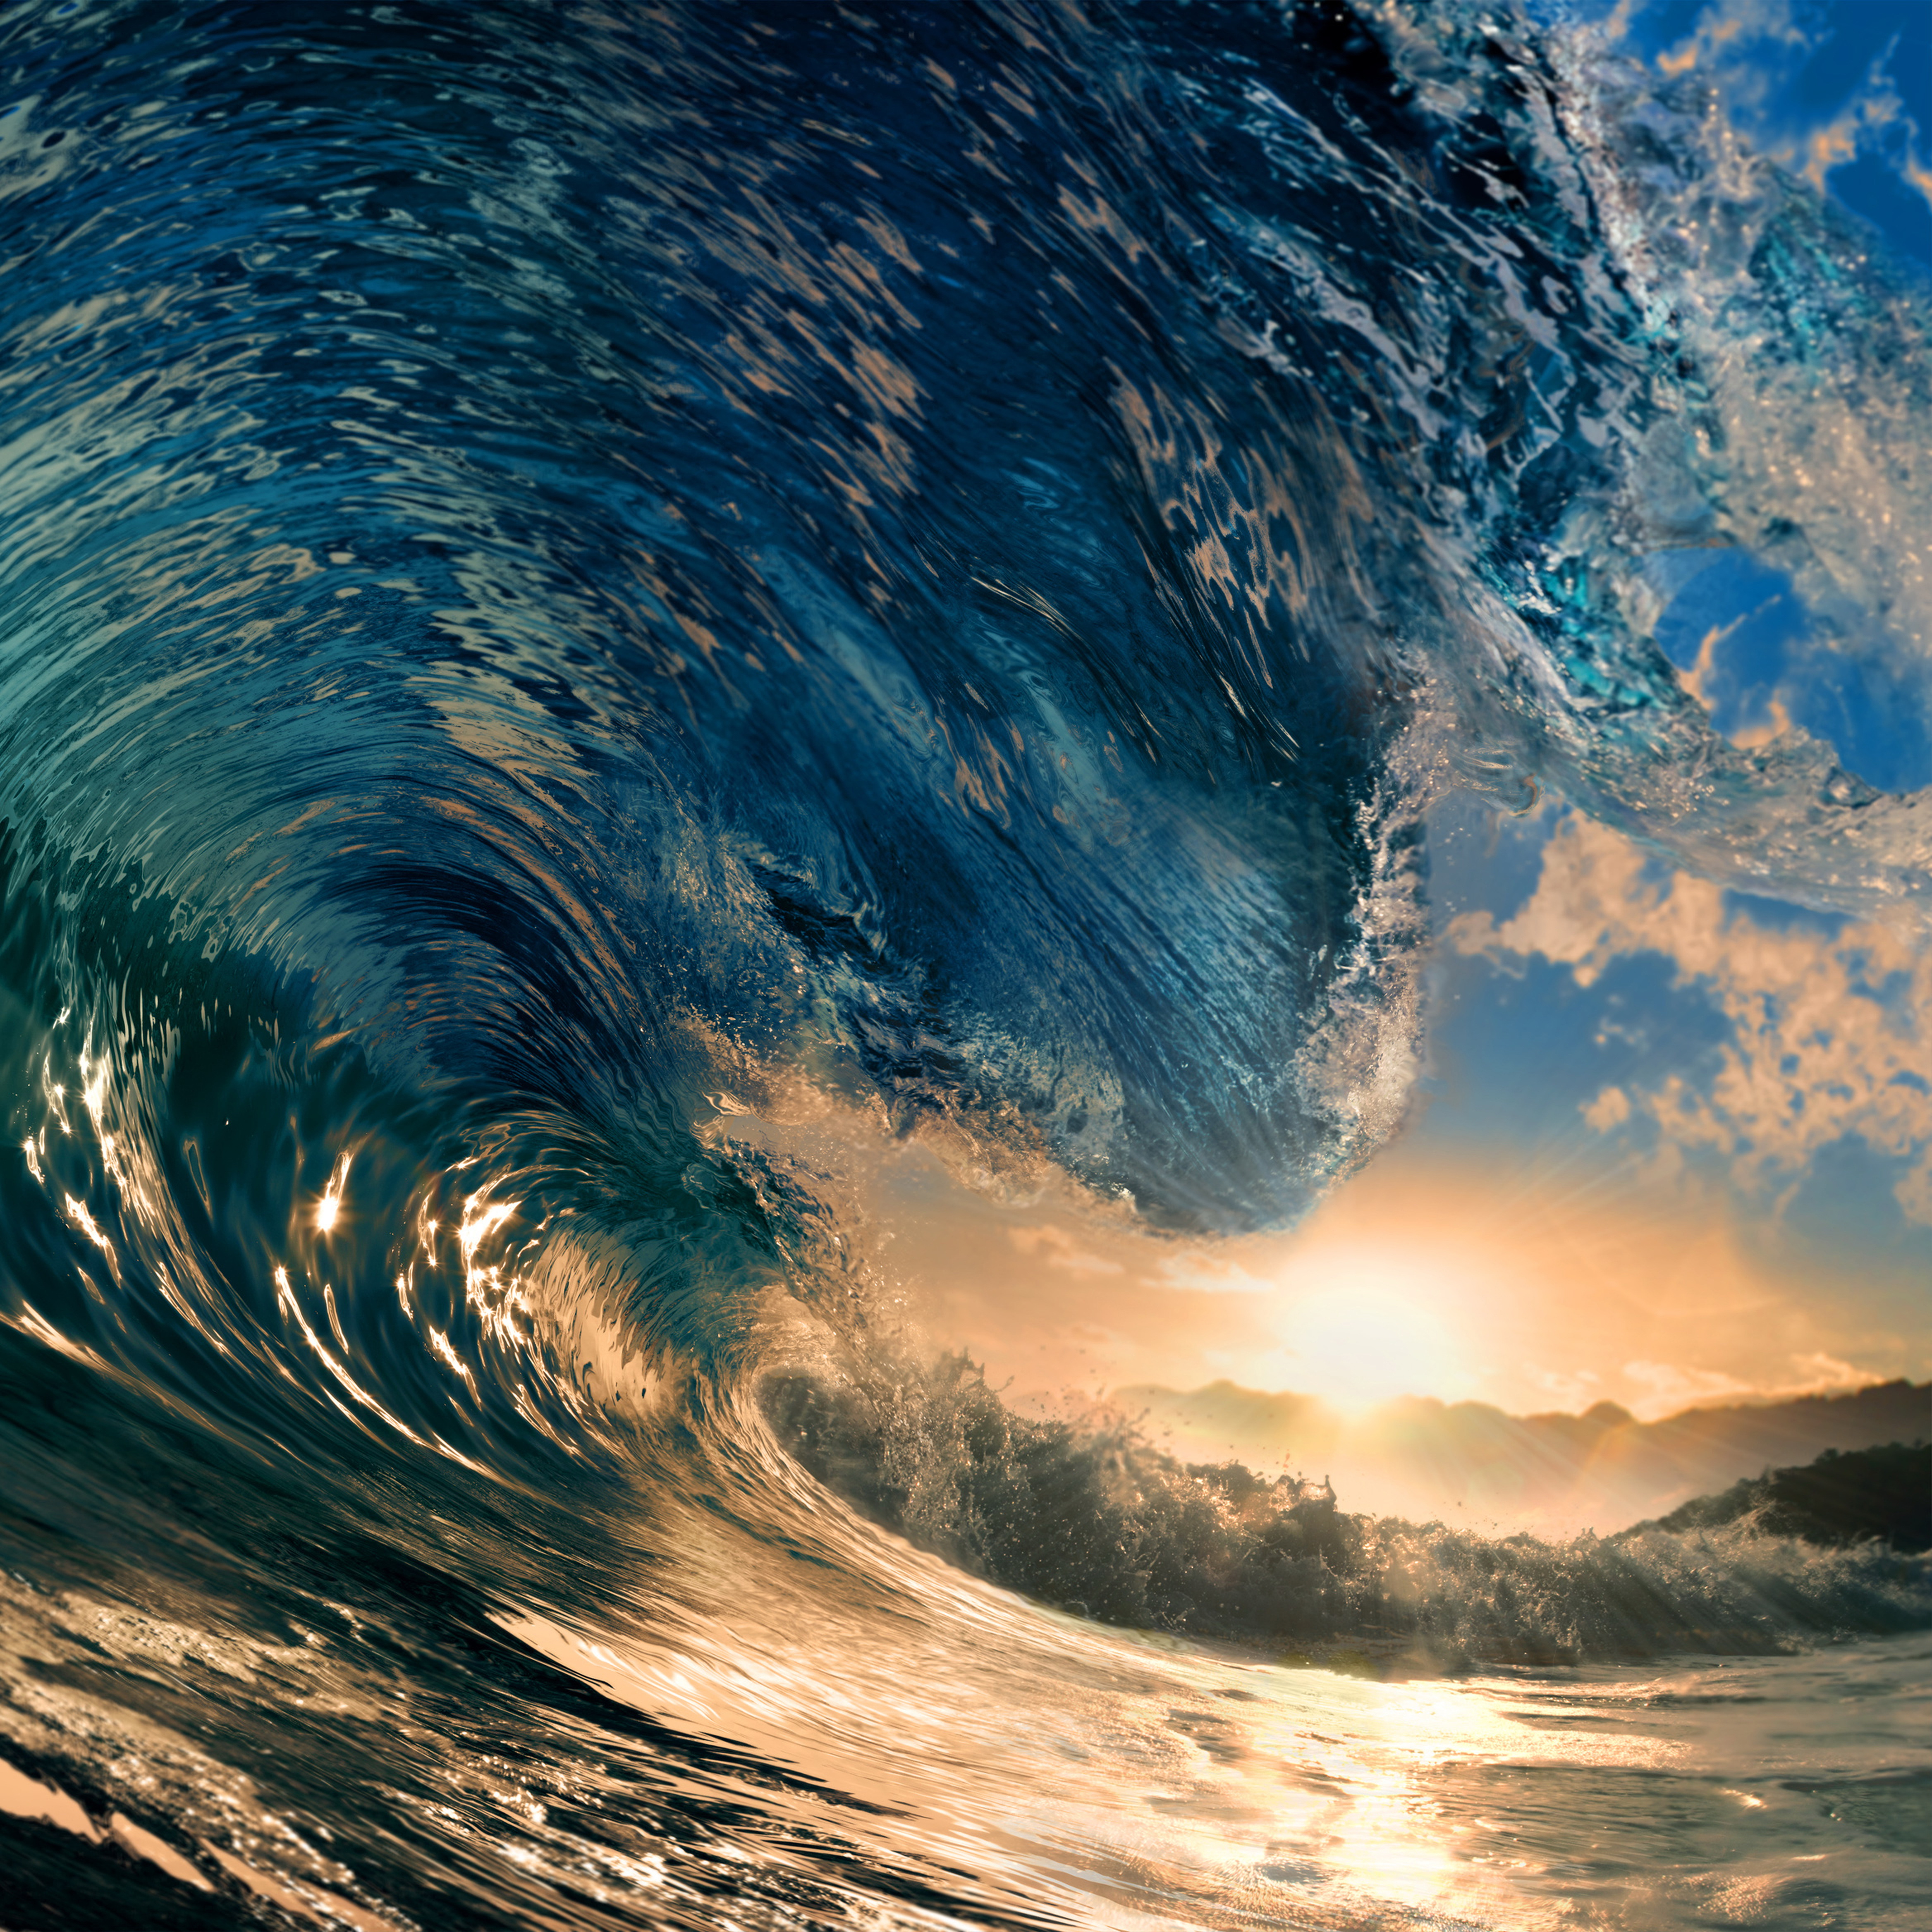 Glassy giant wave / 4672 x 4672 / Water, Elements / Photography ...